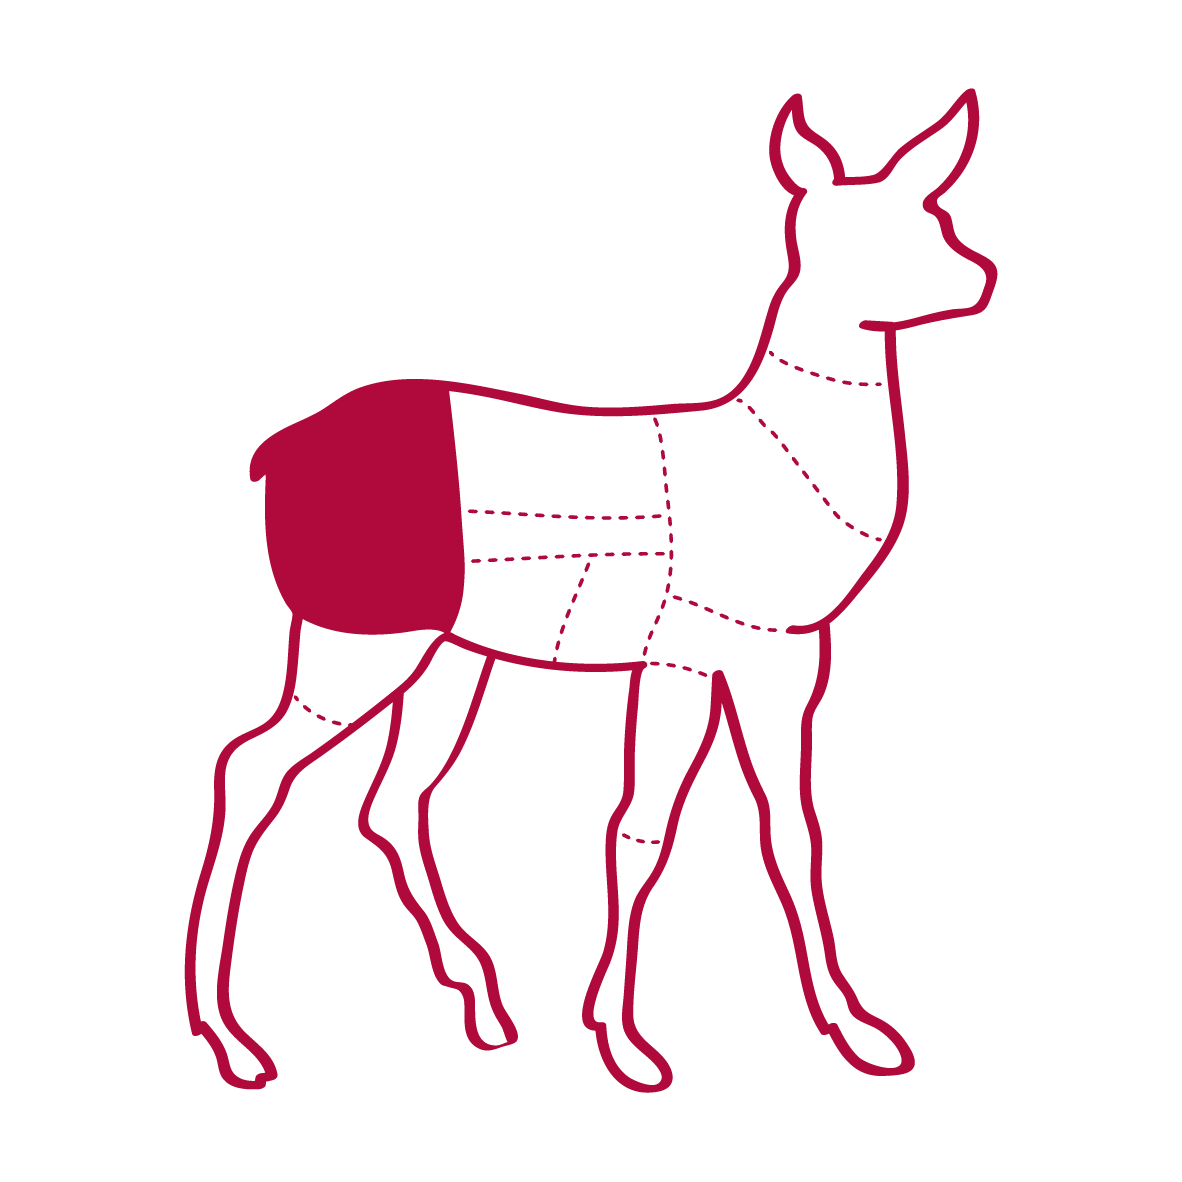 an illustration of a venison carcass showing where medallions come from